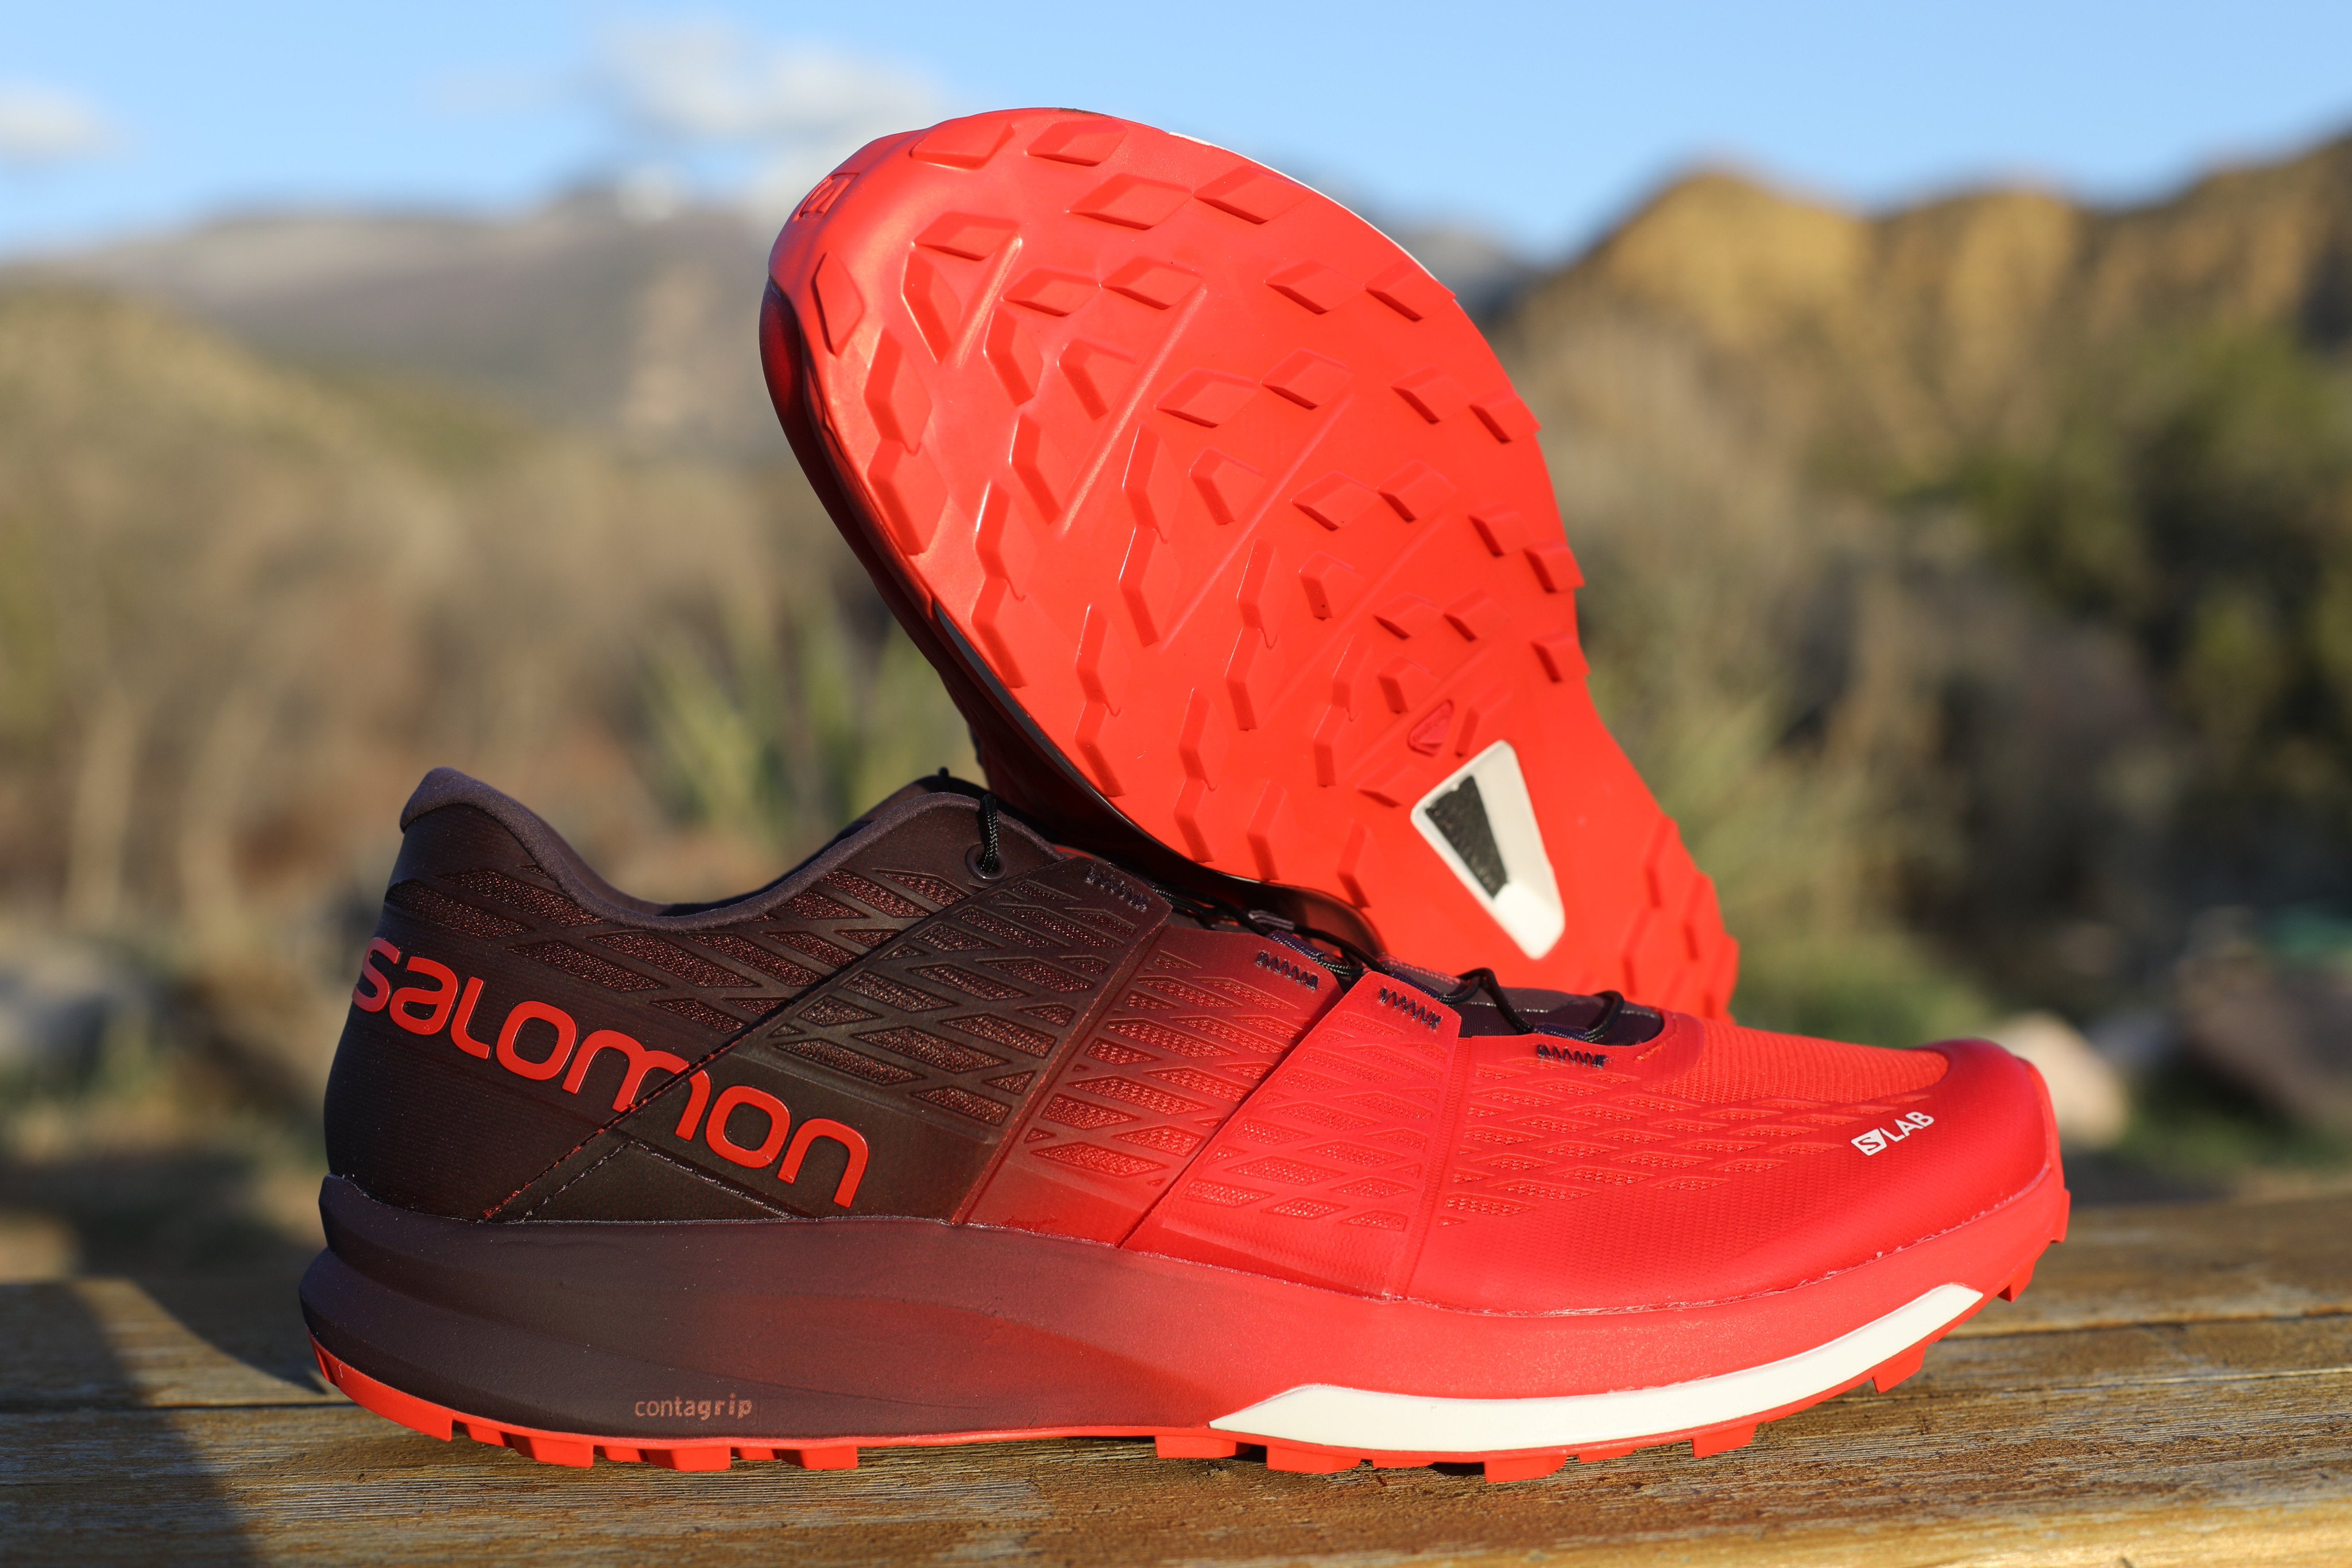 iRunFar on X: "With more cushioning and a wider toebox than most Salomon shoes, the Salomon S/LAB Ultra is meant to go ultramarathon distance. Review: https://t.co/3Ik5poJPw2 https://t.co/GWxutIKHK2" / X